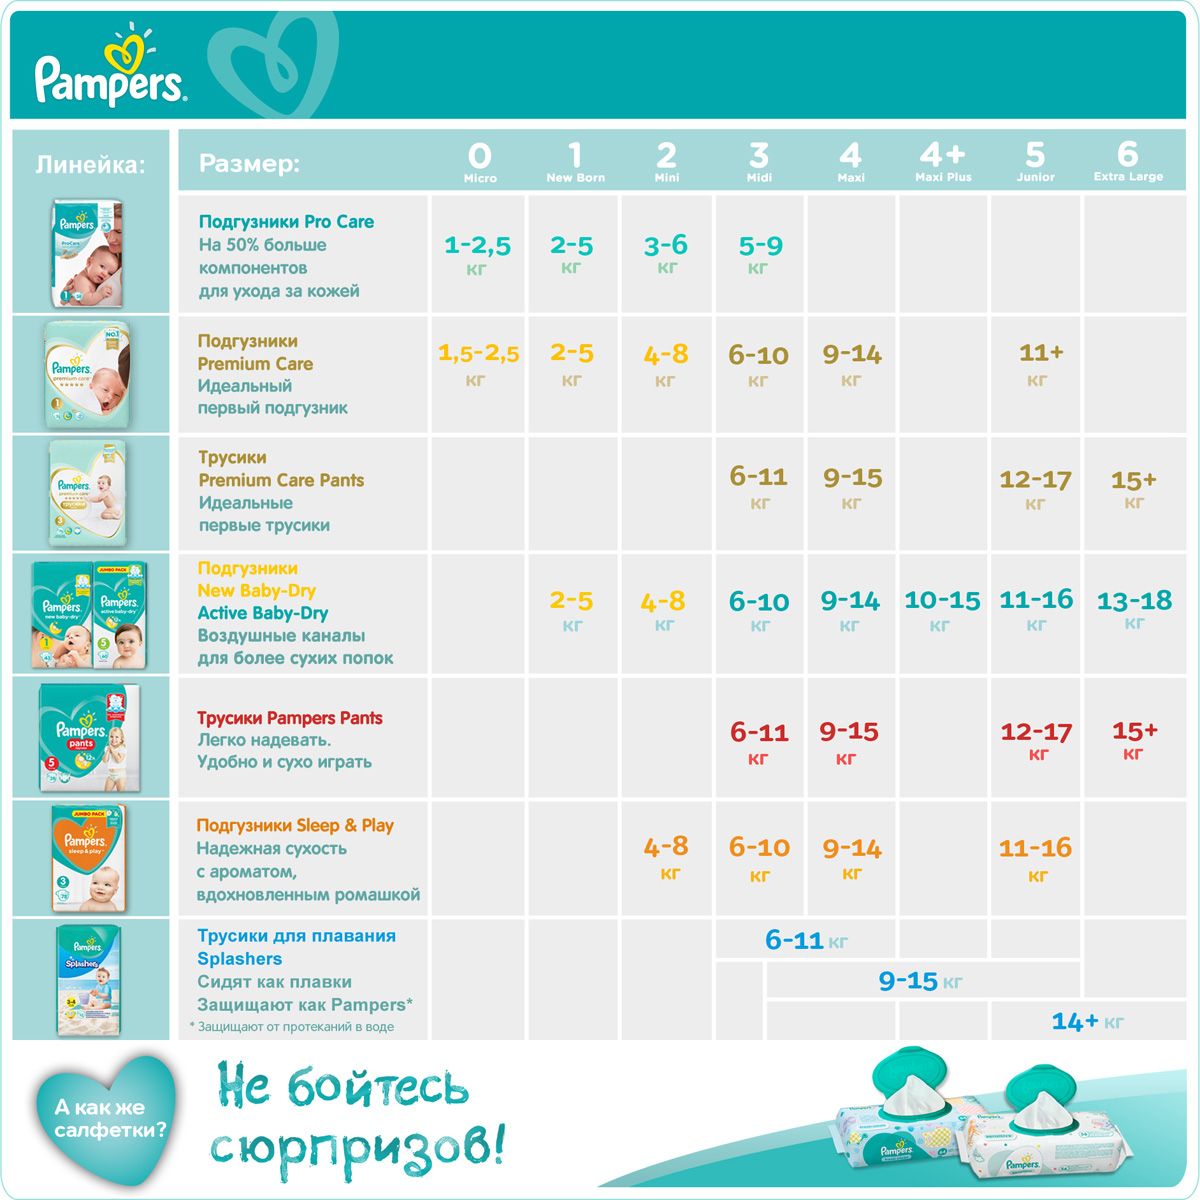 Pampers  Pants 15+  ( 6) 132 